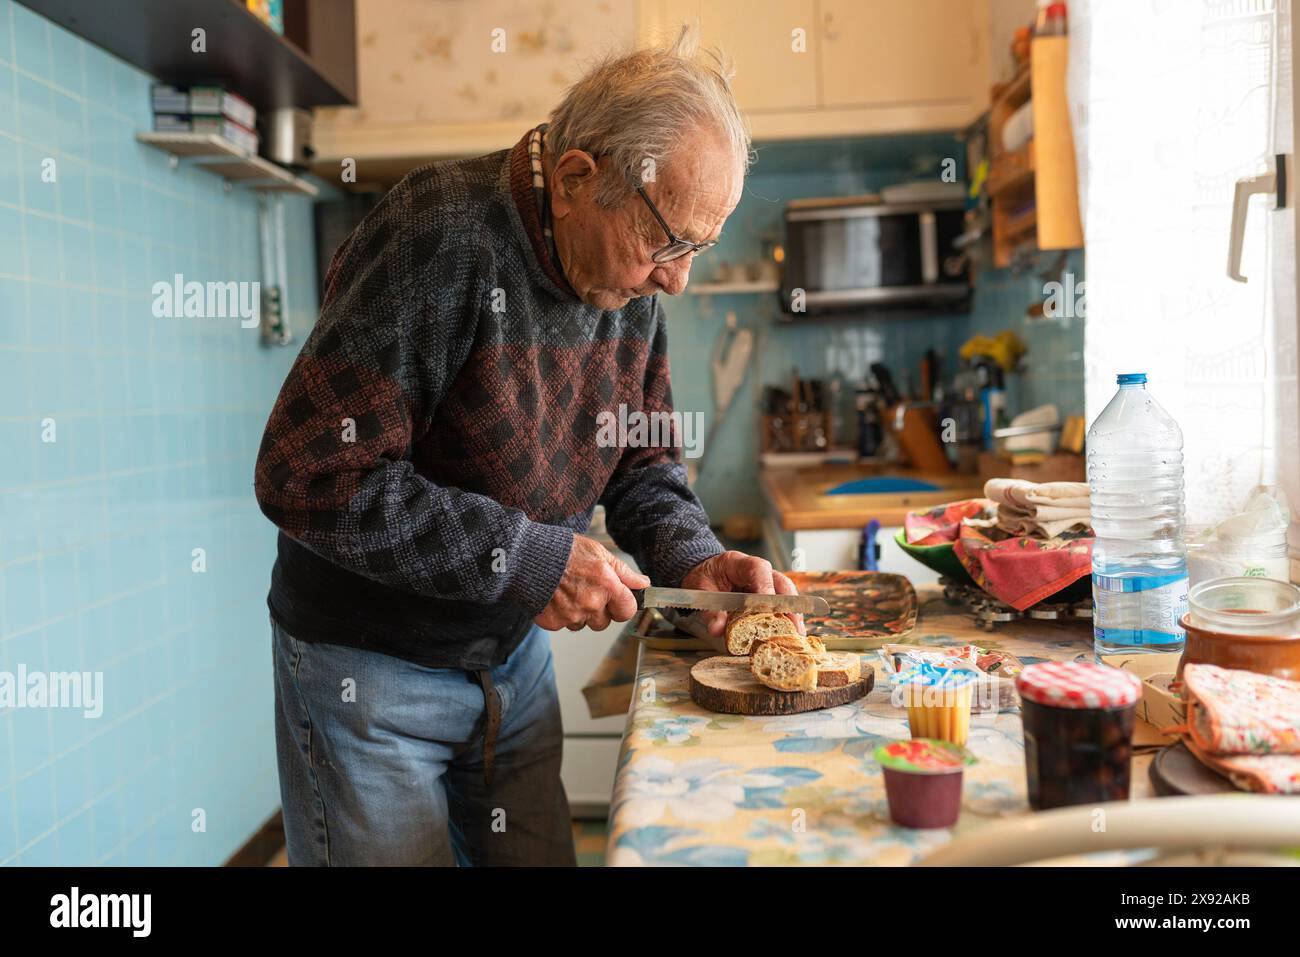 90 year old person cutting bread in his kitchen for his meal. 90 year old senior 016739 034 Stock Photo